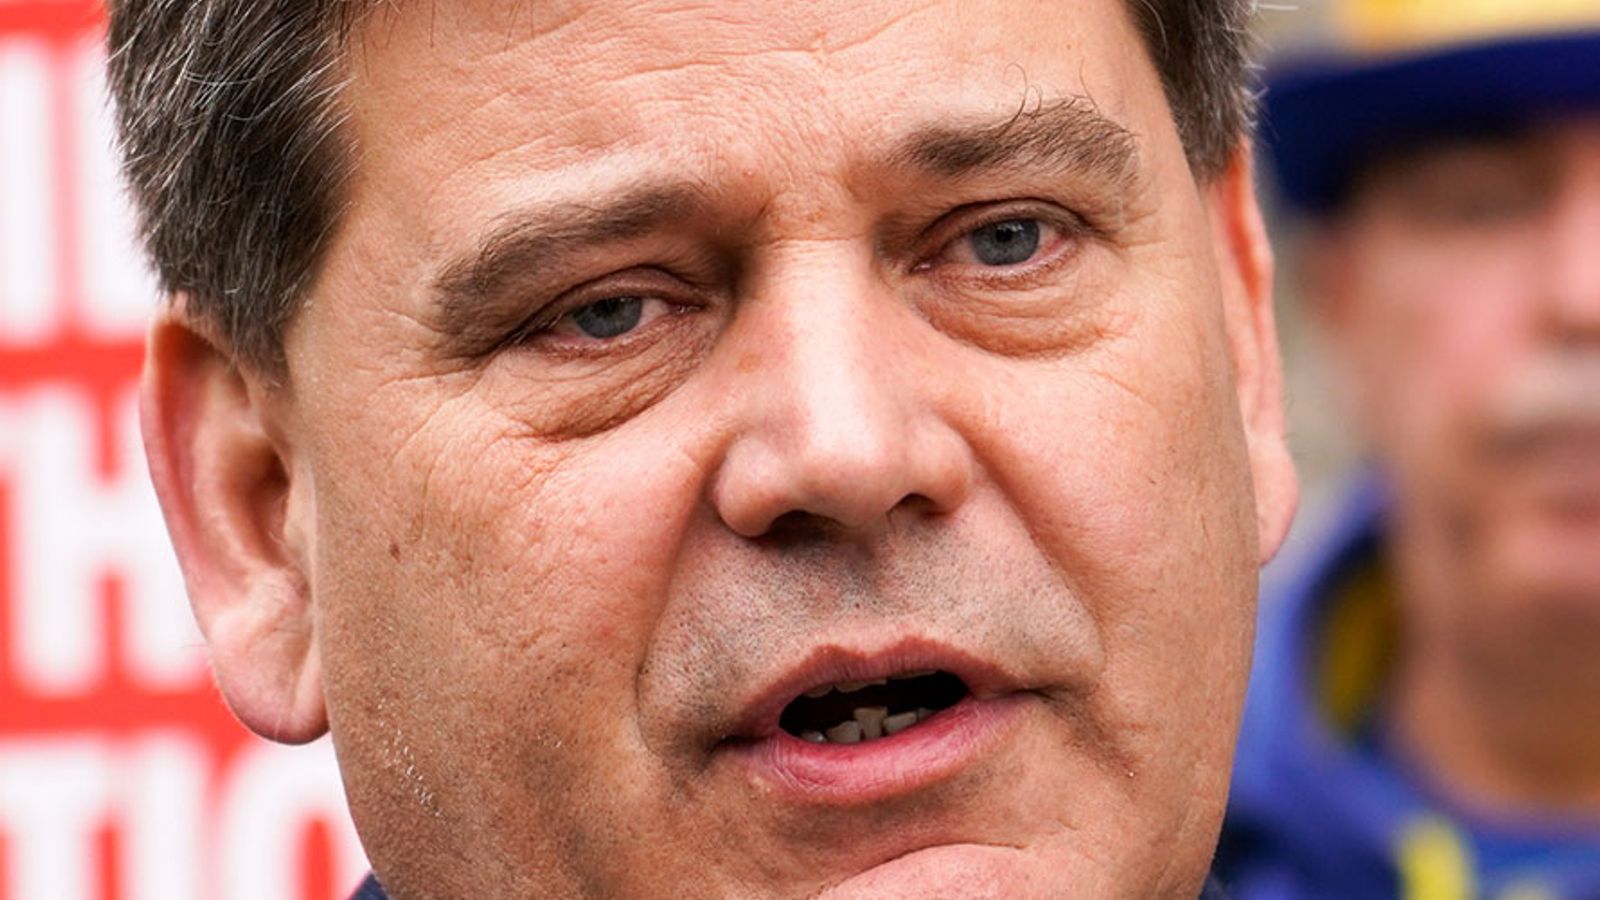 Tory MP Andrew Bridgen should be suspended for threatening commissioner, Standards Committee recommends